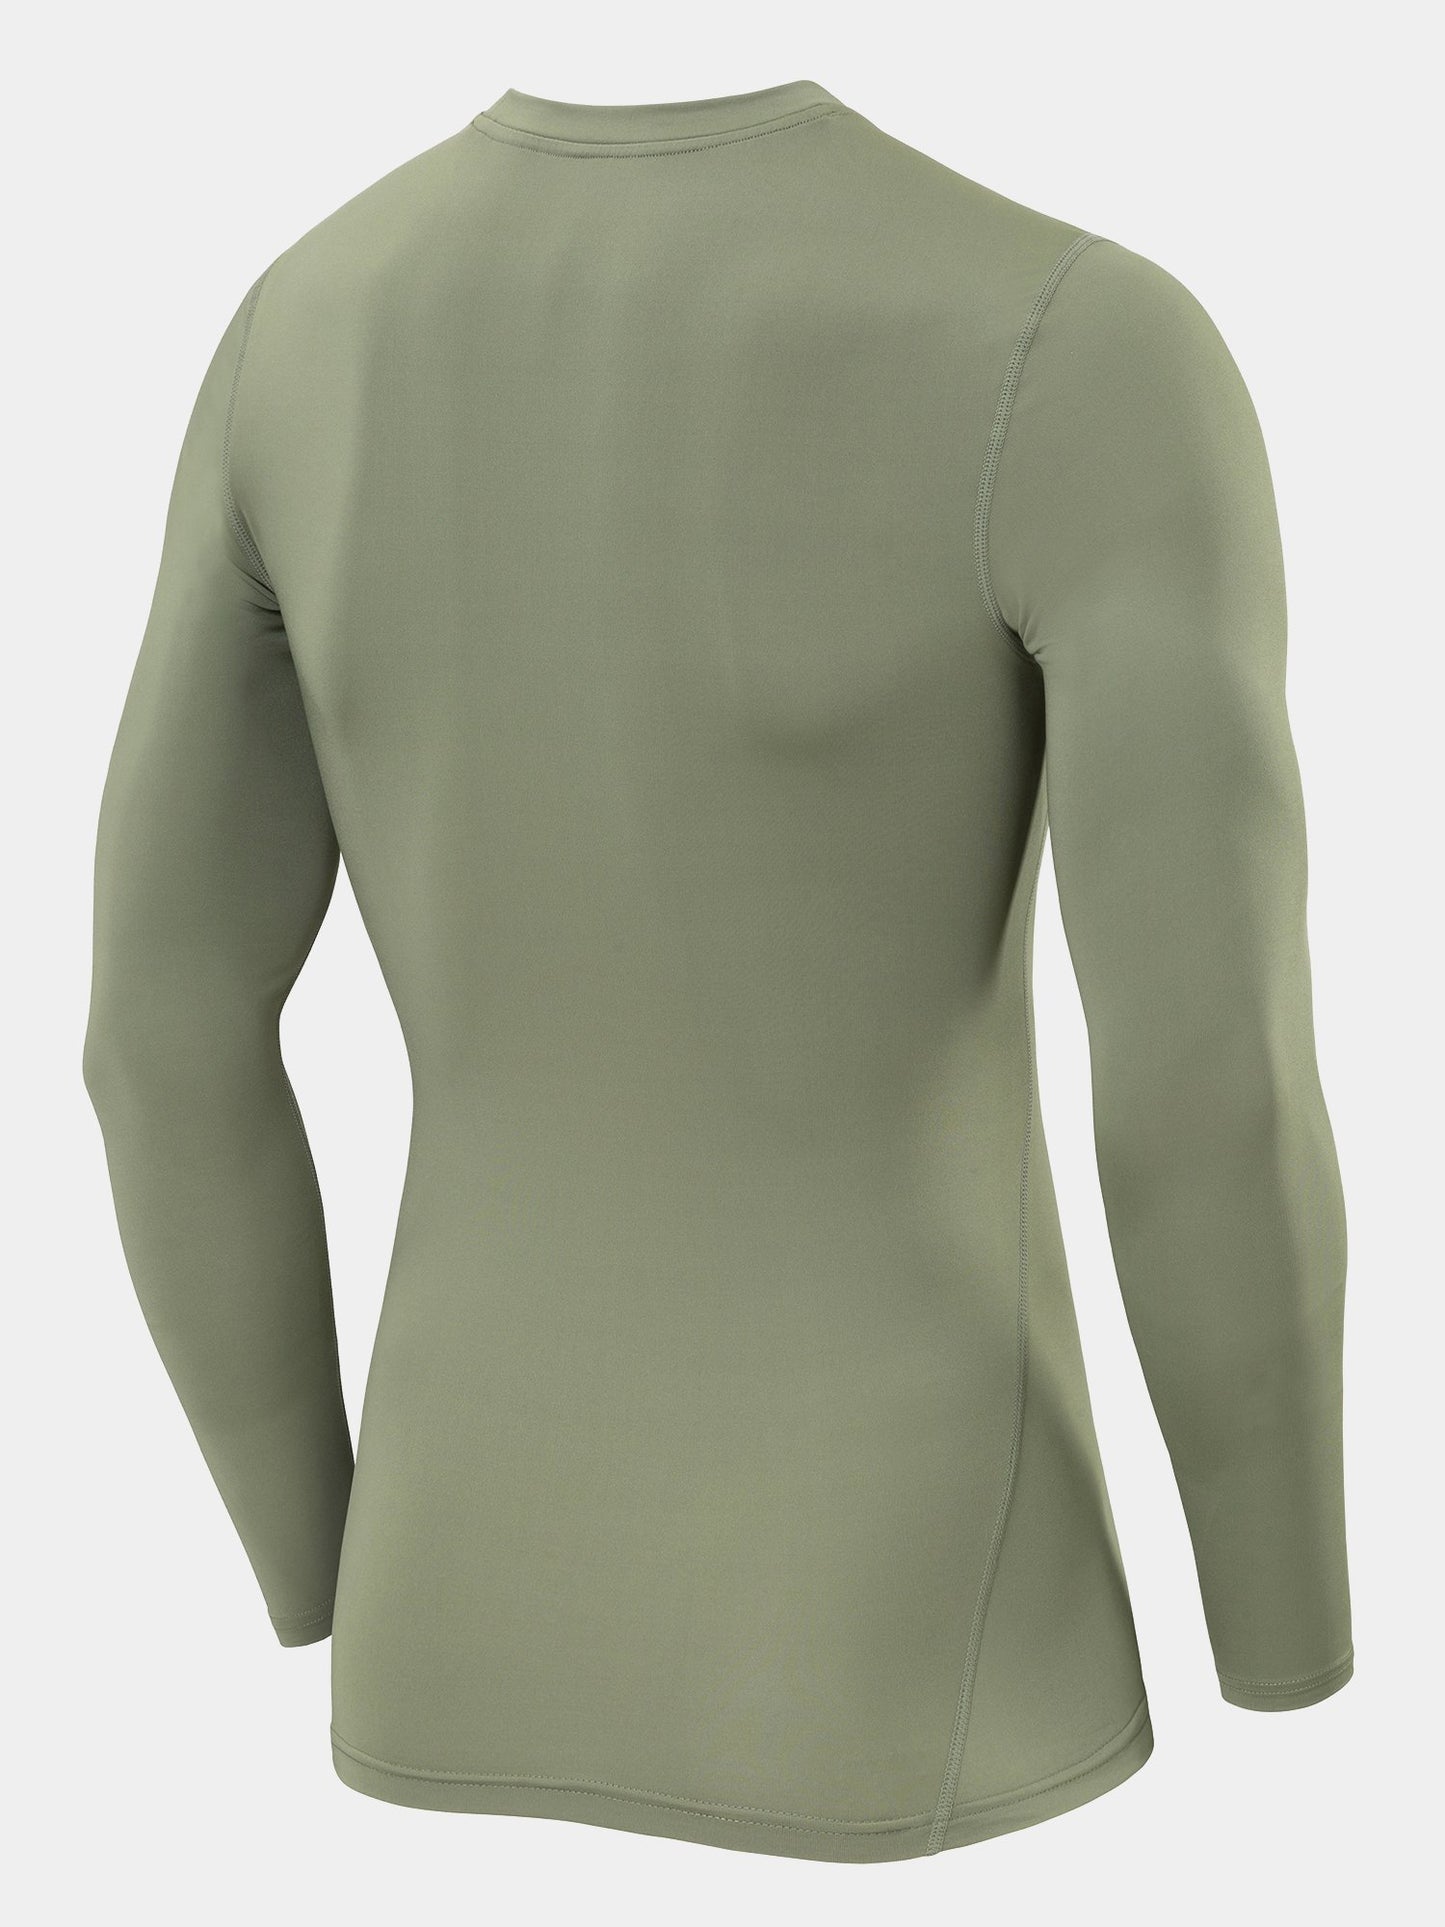 Pro Performance Compression Base Layer Long Sleeve Crew Neck For Men